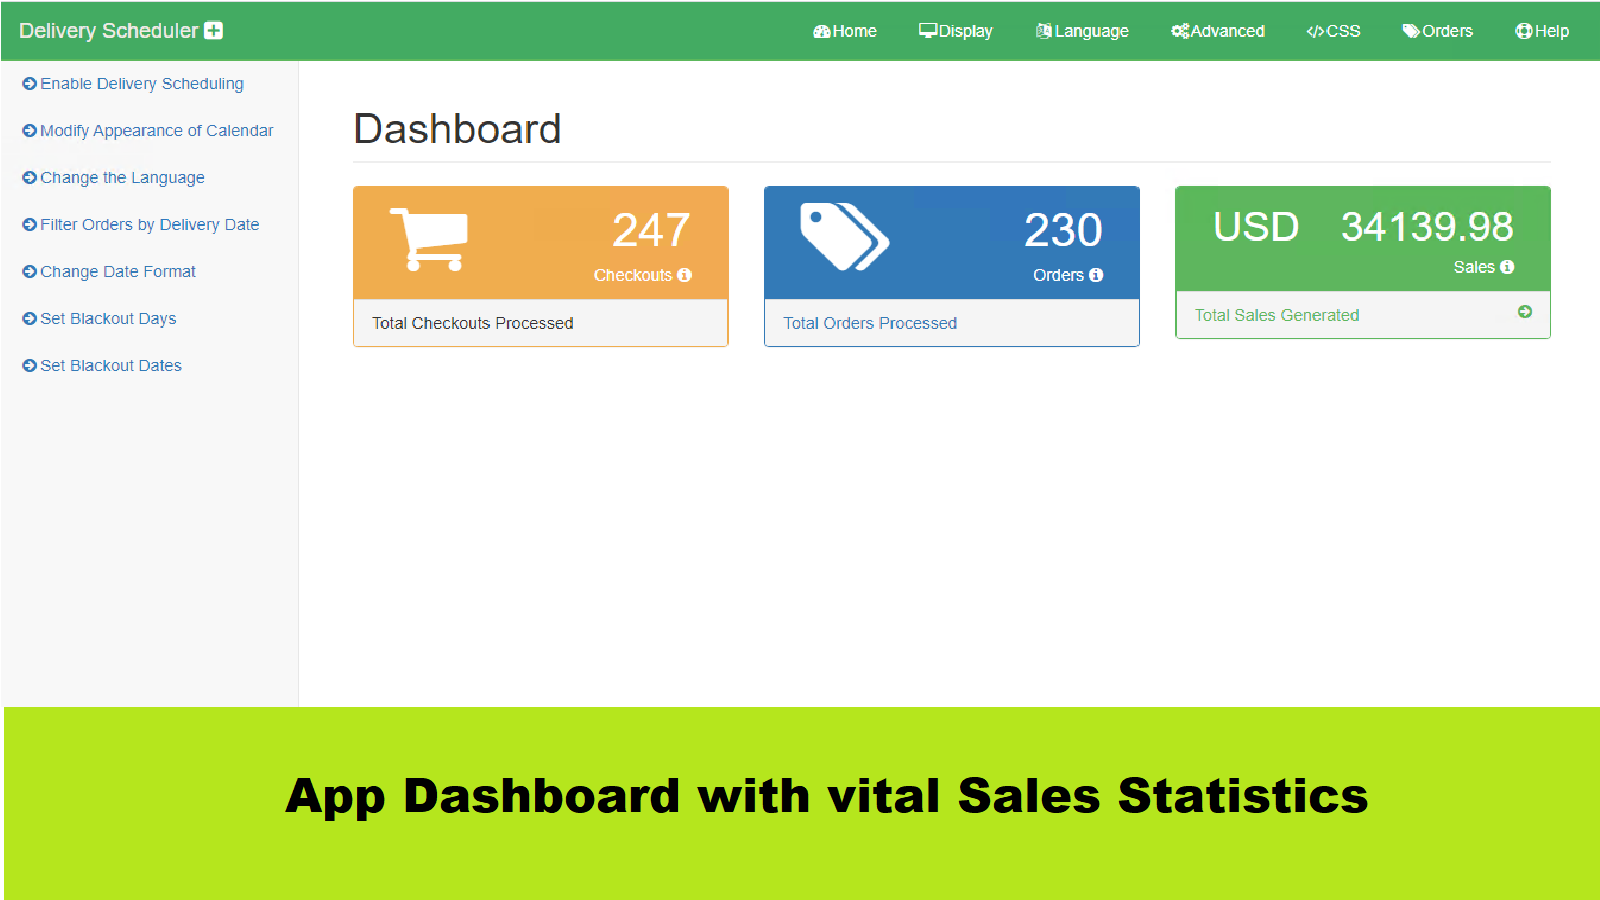 App Dashboard with vital stats